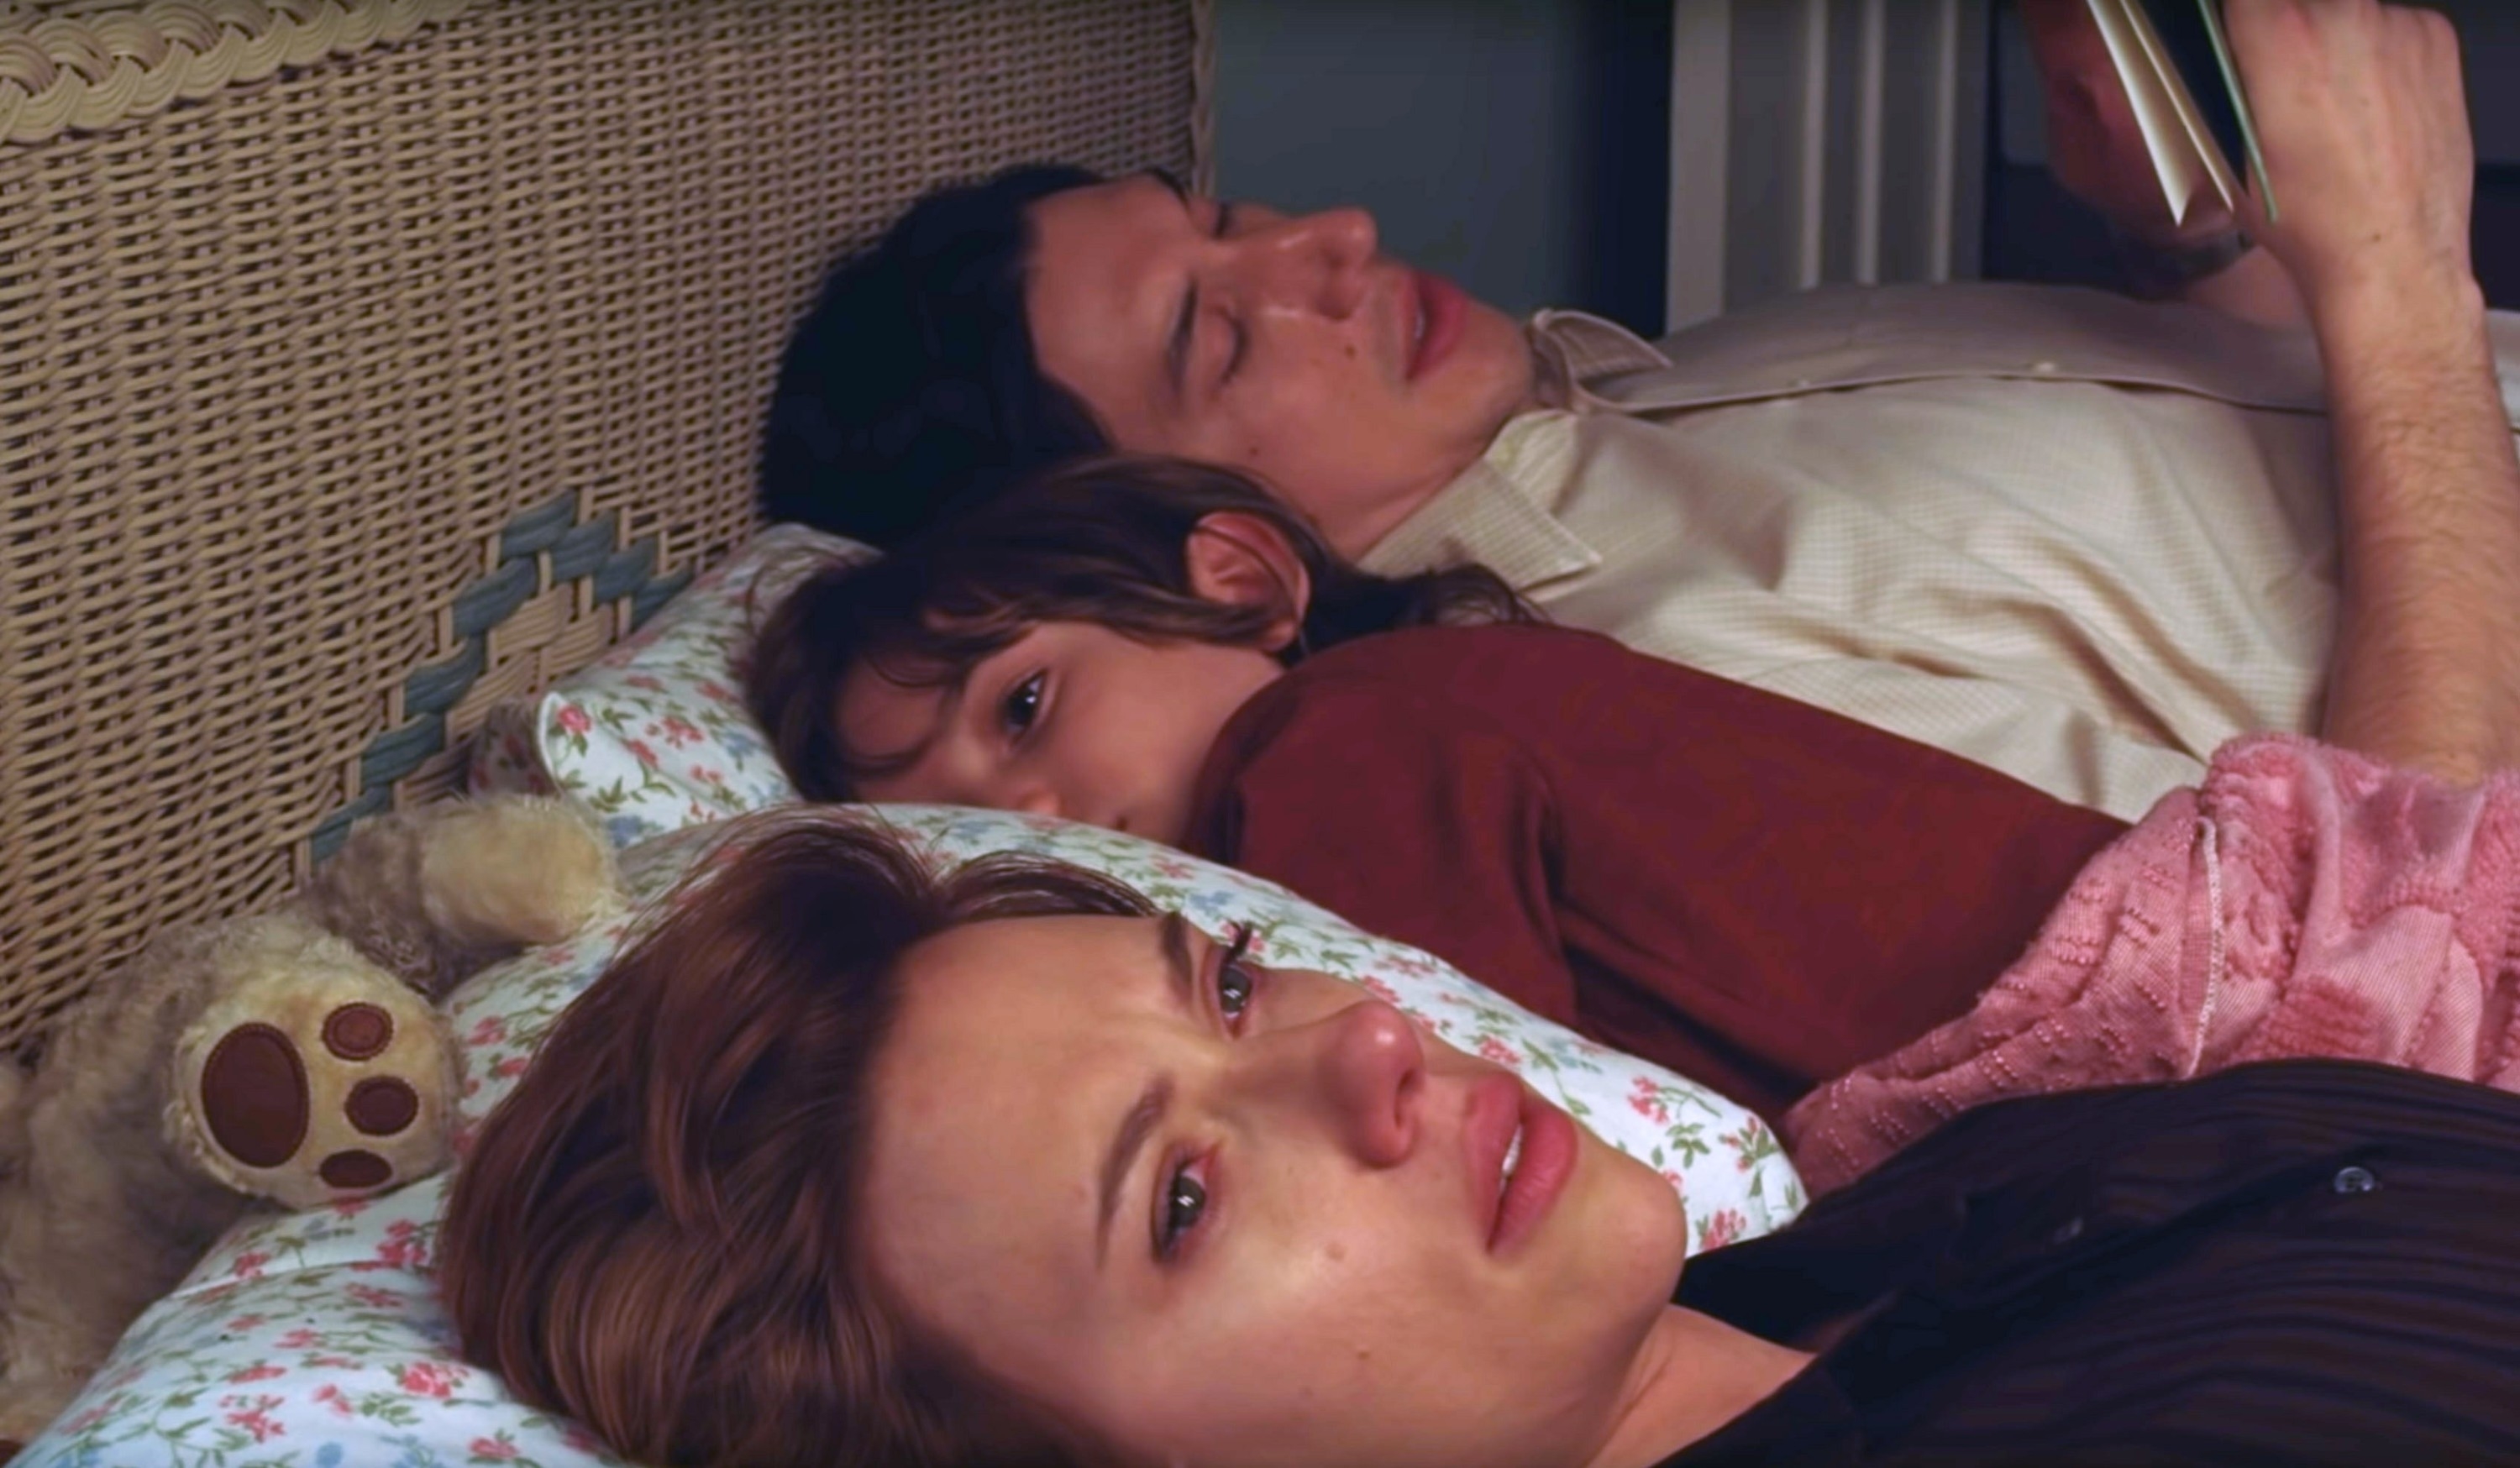 Scarlett Johansson, Adam Driver, and a child lie in bed. Scarlett is in the foreground, looking emotional. A teddy bear lies near the child and Adam is reading a book